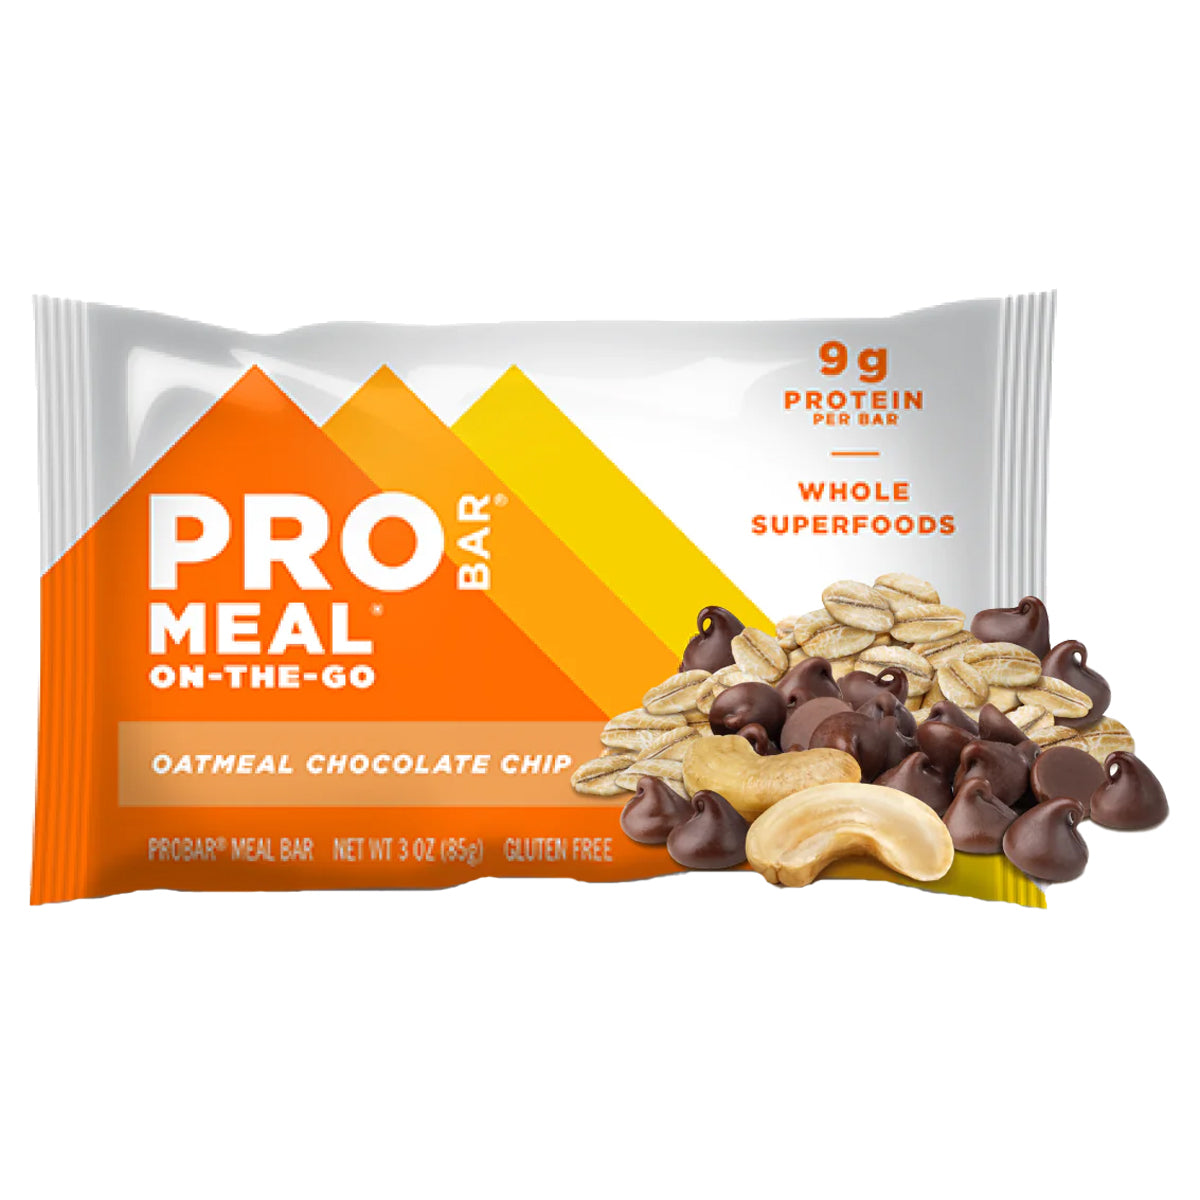 PROBAR Meal Bar in  by GOHUNT | Pro Bar - GOHUNT Shop